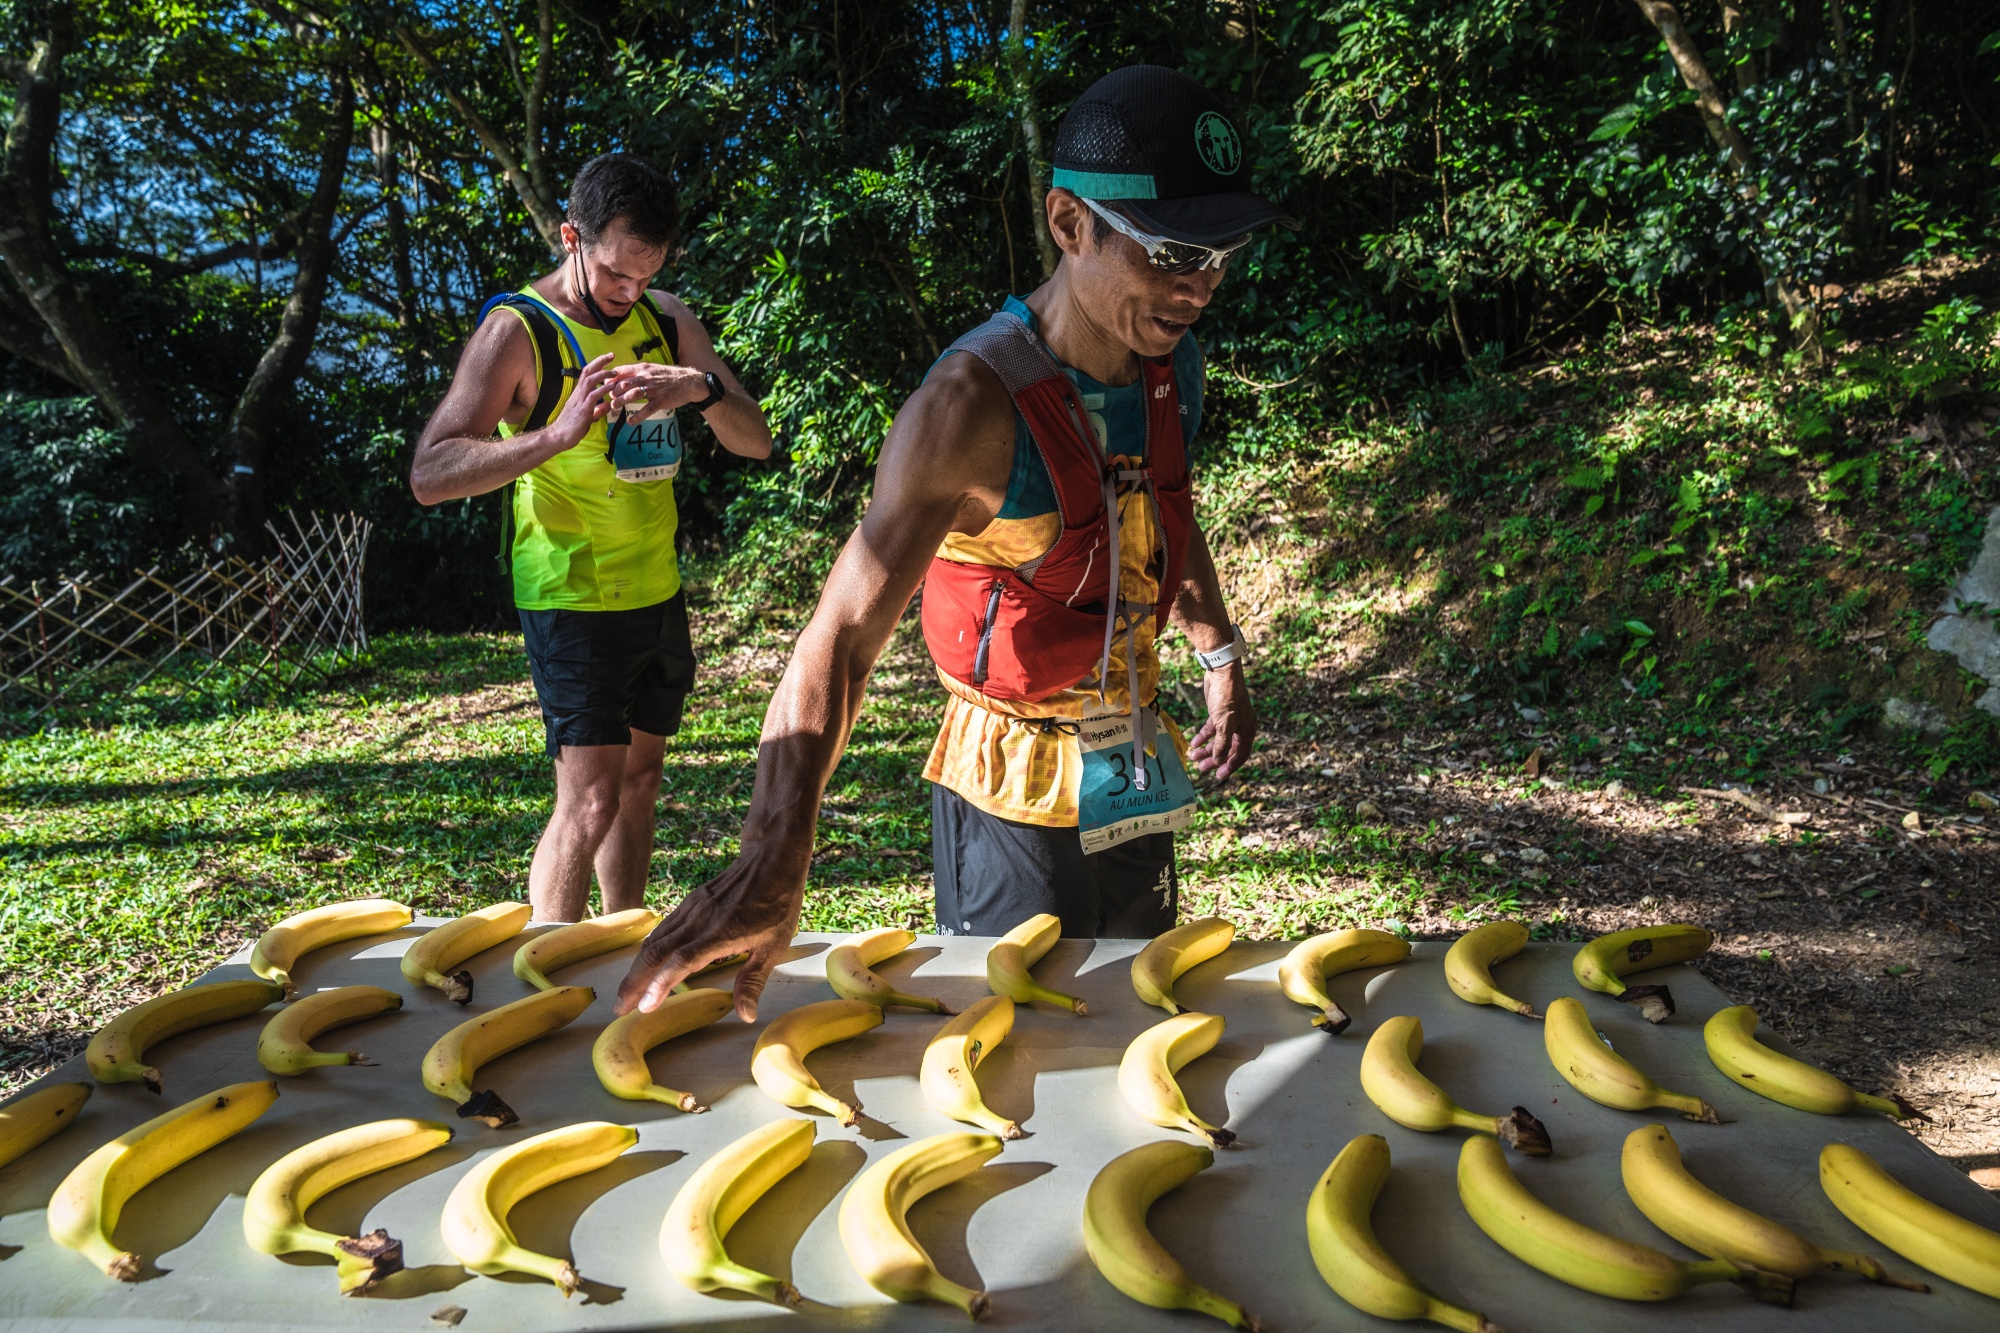 A runner takes a banana at a support station during the Island Hike & Run organized by Action Asia, in Hong Kong, on Nov. 13.